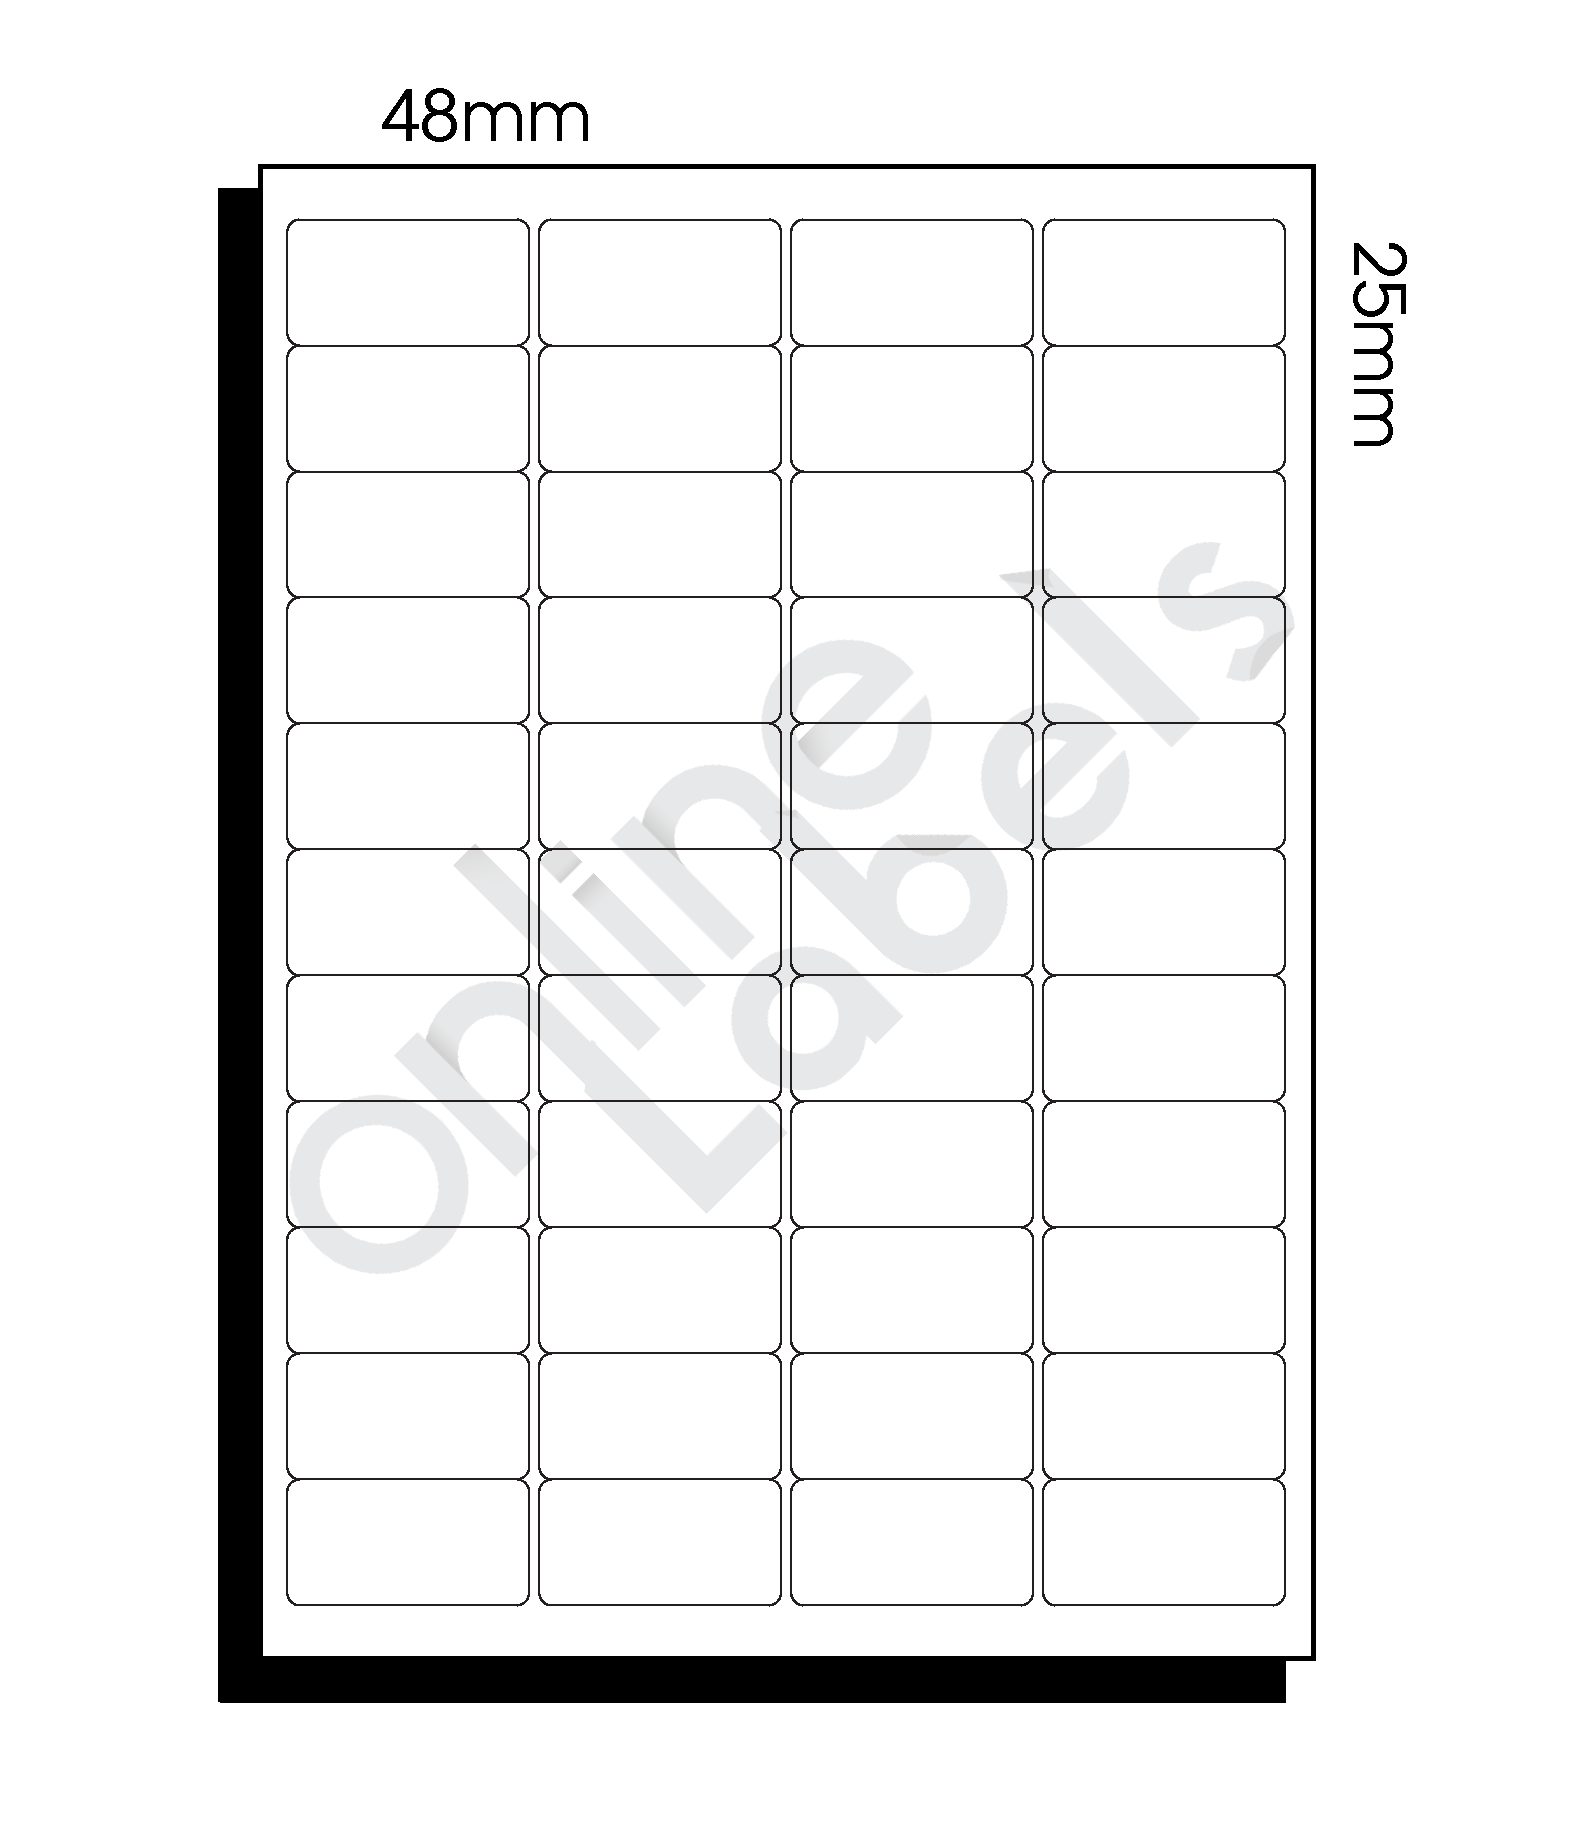 22mm x 22mm - 22 Labels per Sheet - Online Labels Pertaining To Word Label Template 12 Per Sheet